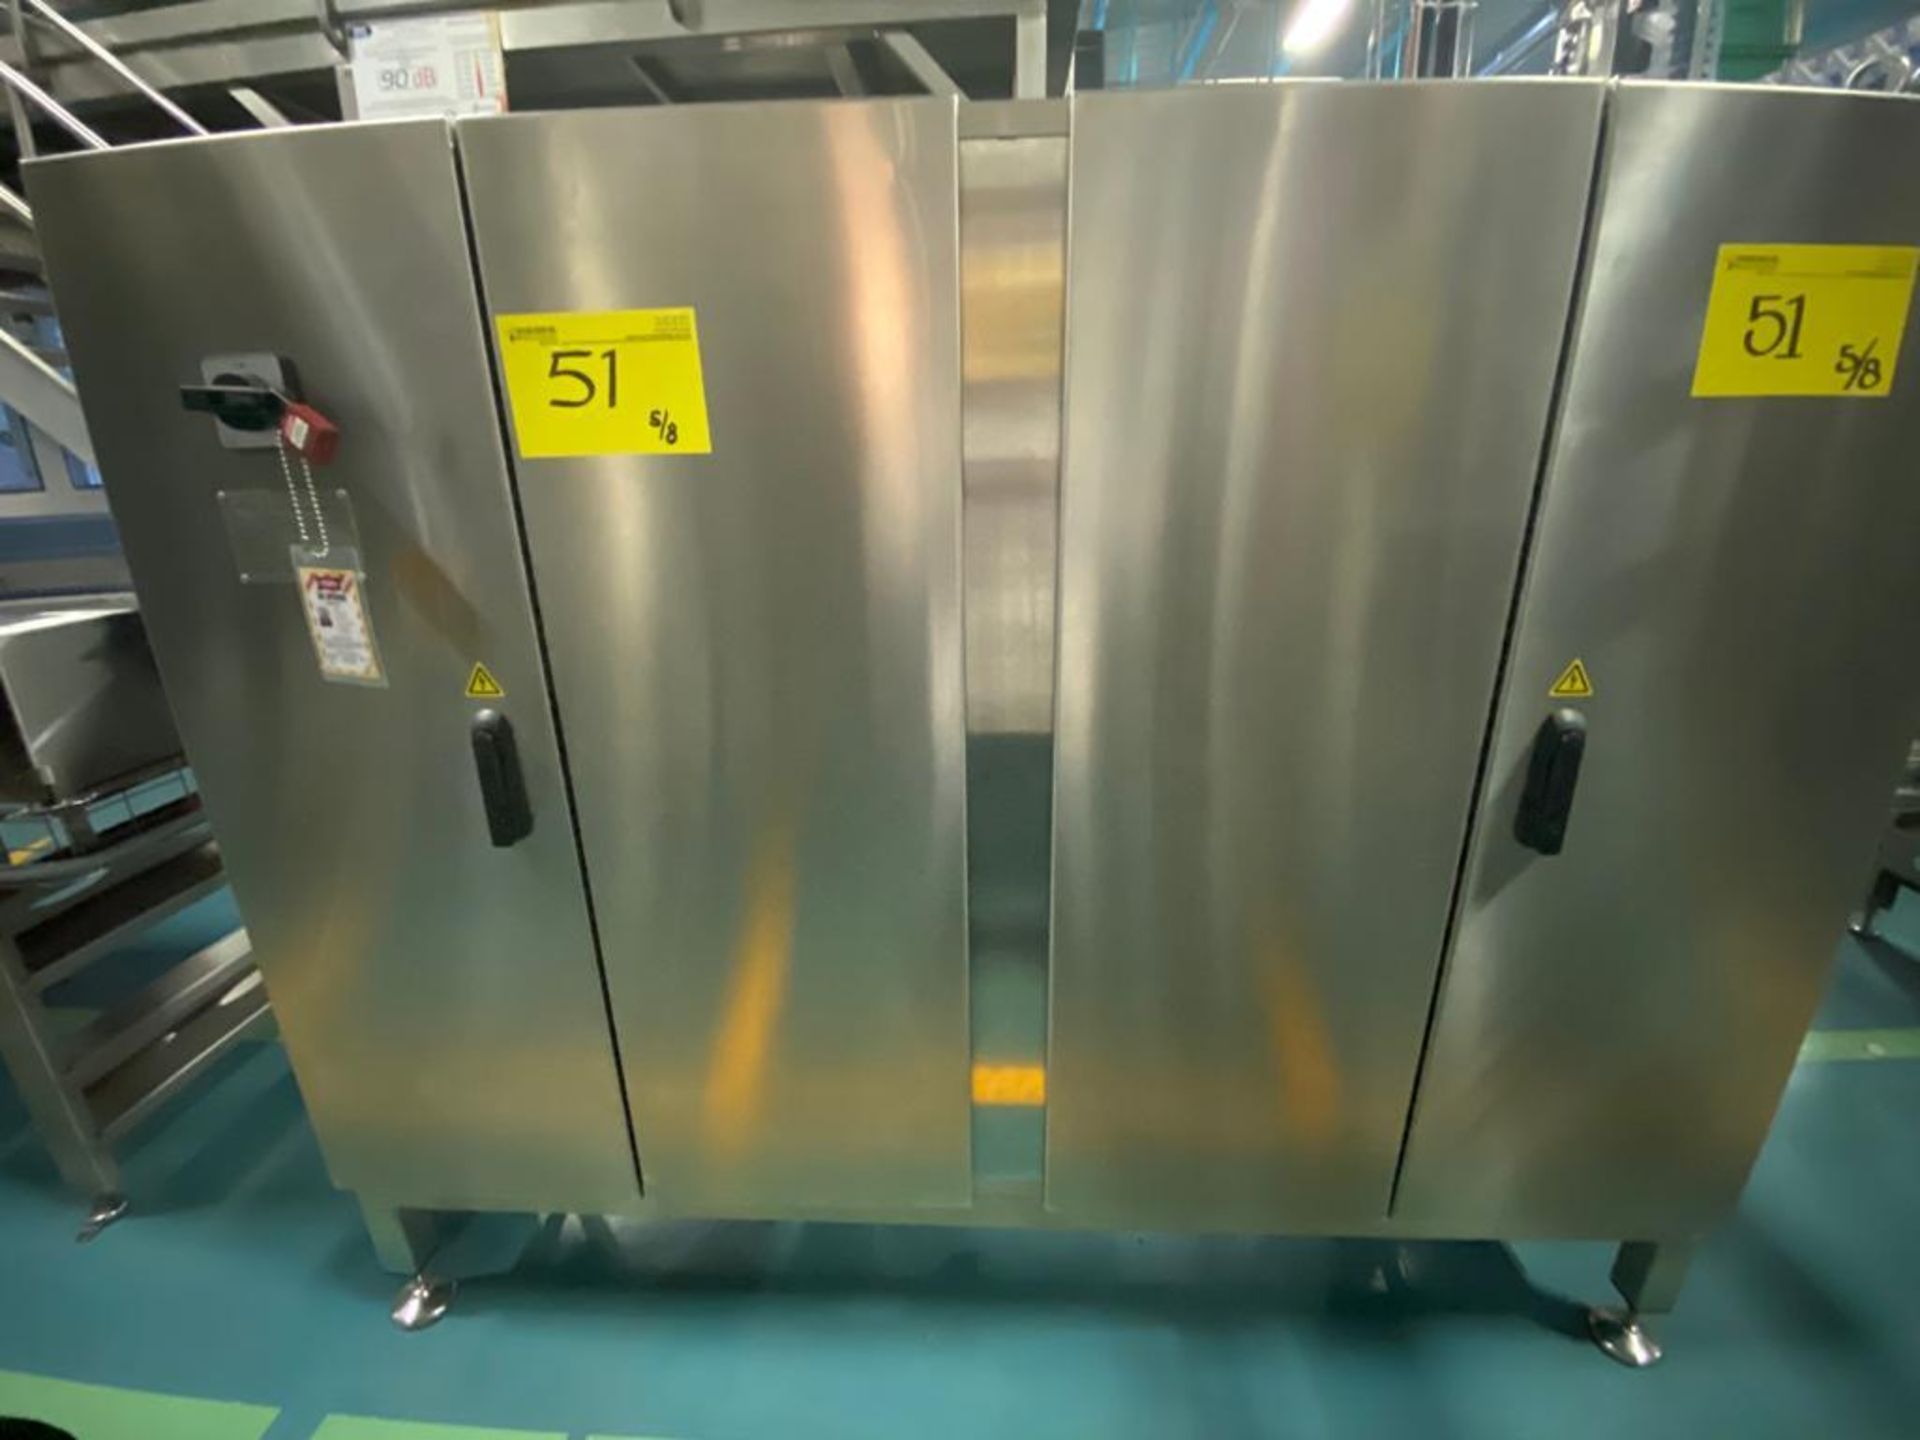 2019 Sleeve Technology Shrink Sleeve Labeling Line, S/N1902079, Consist of Bottle Air Drying Tunnel - Image 49 of 50